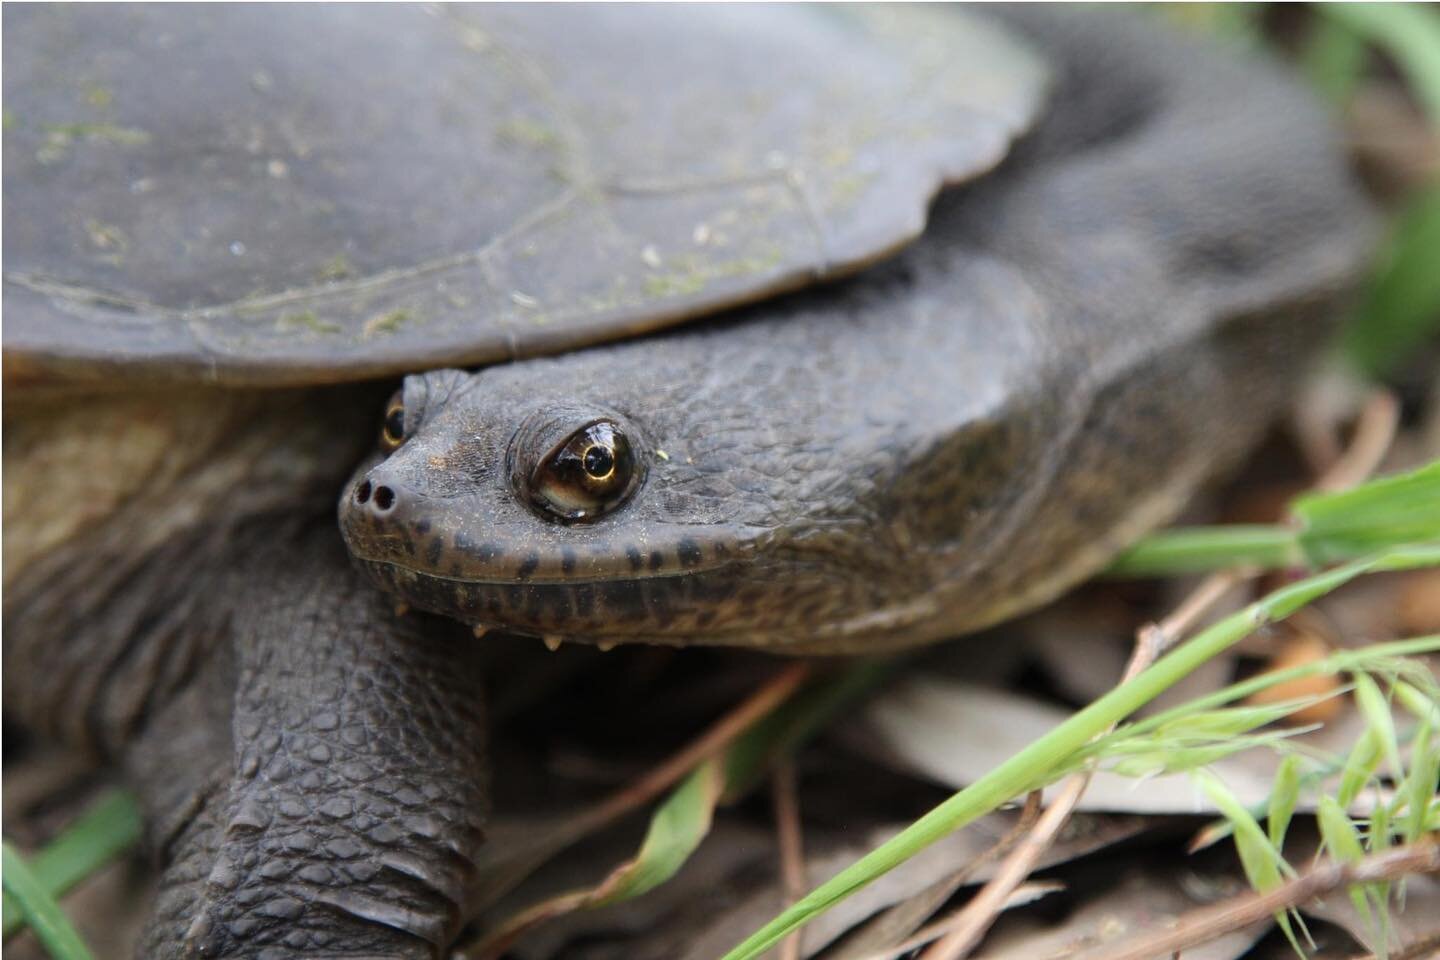 🐢Turtle nesting season is still going! 🐢
We would love #SOSNT #TurtleTracker teams to  keep patrolling your wetlands until the end of November. But if you've finished up already then a huge THANK YOU for your time this season. You have really made 